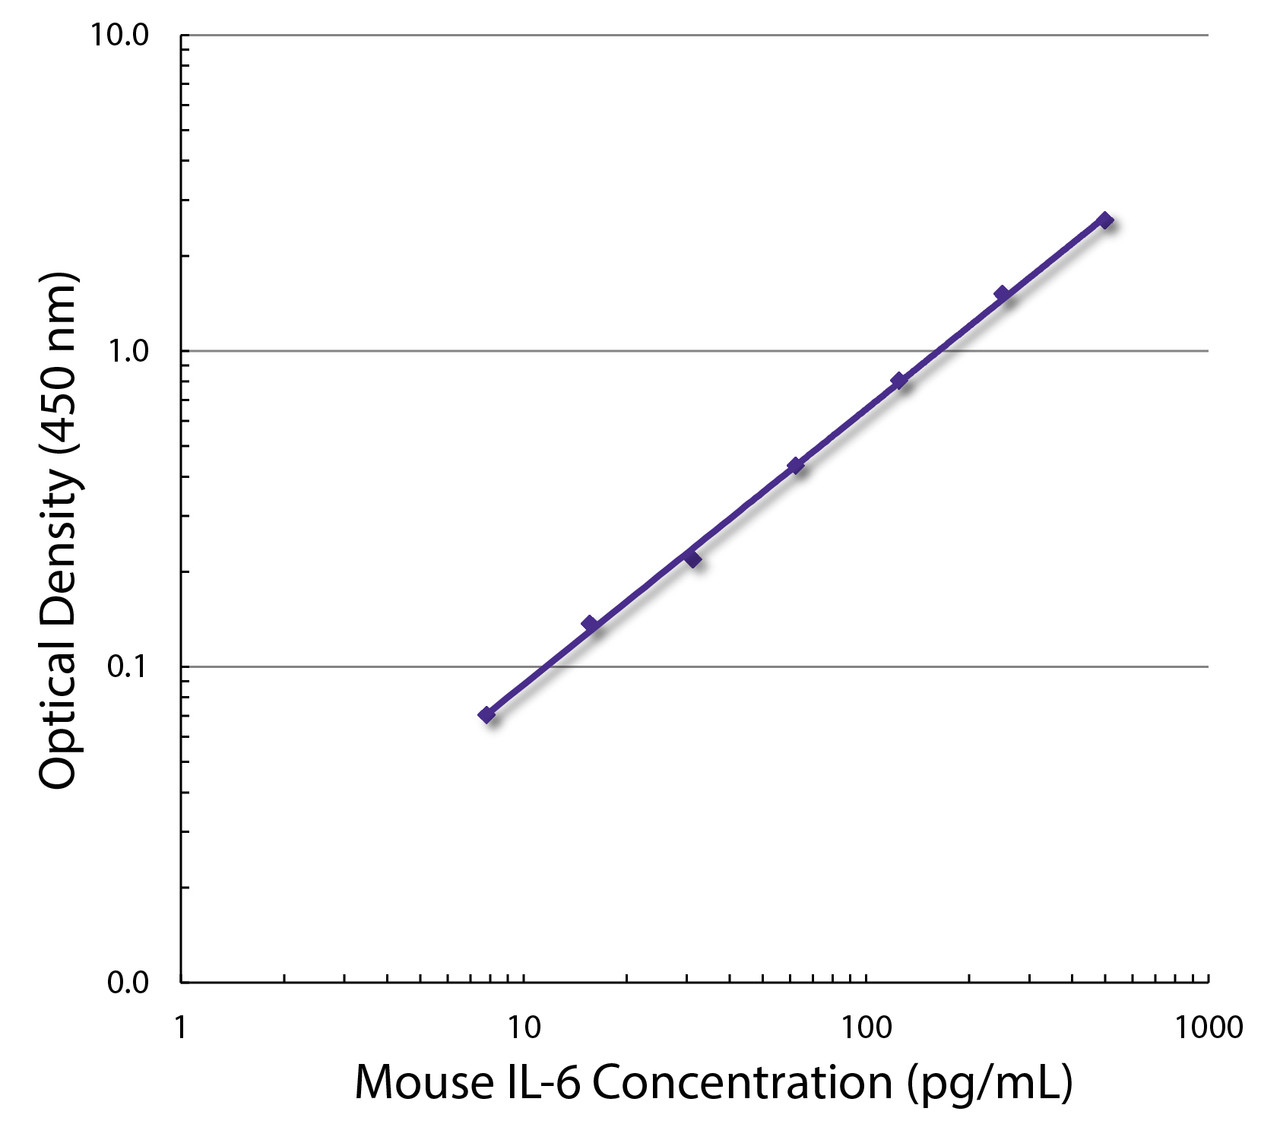 Standard curve generated with Rat Anti-Mouse IL-6-UNLB (Cat. No. 99-693; Clone MP5-20F3) and Rat Anti-Mouse IL-6-BIOT (Clone MP5-32C11) followed by Mouse Anti-BIOT-HRP